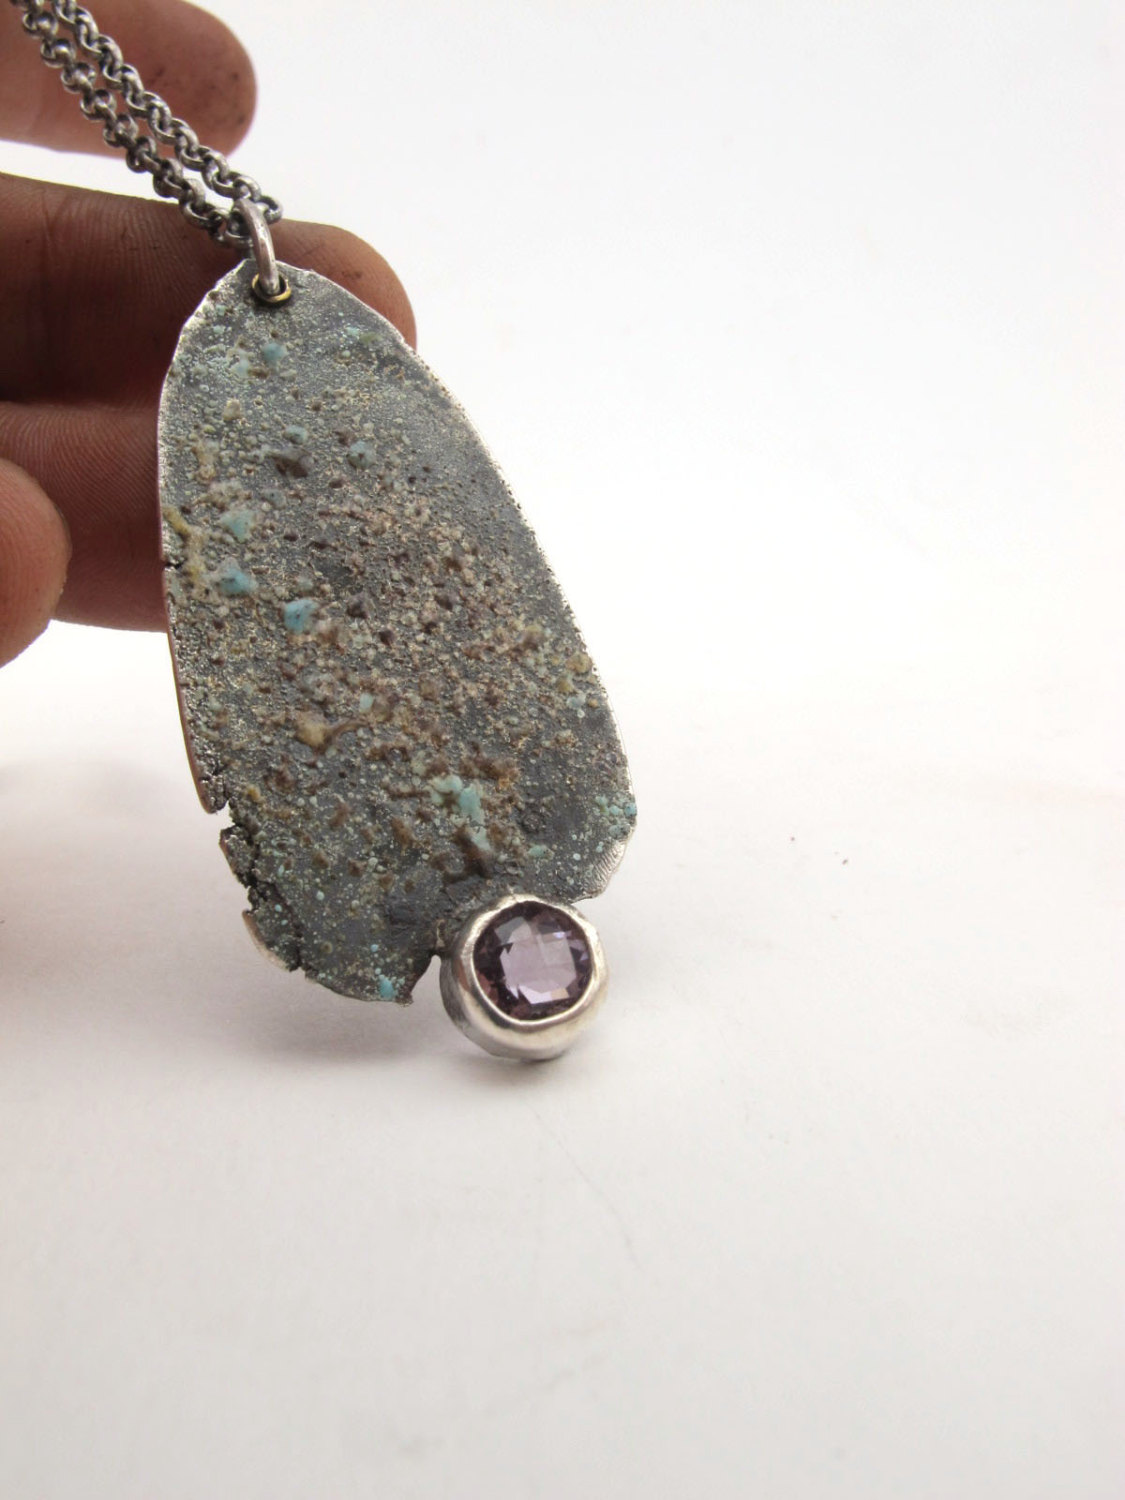 Mossy Pendant- Sterling Silver And Amethyst Tag Pendant.